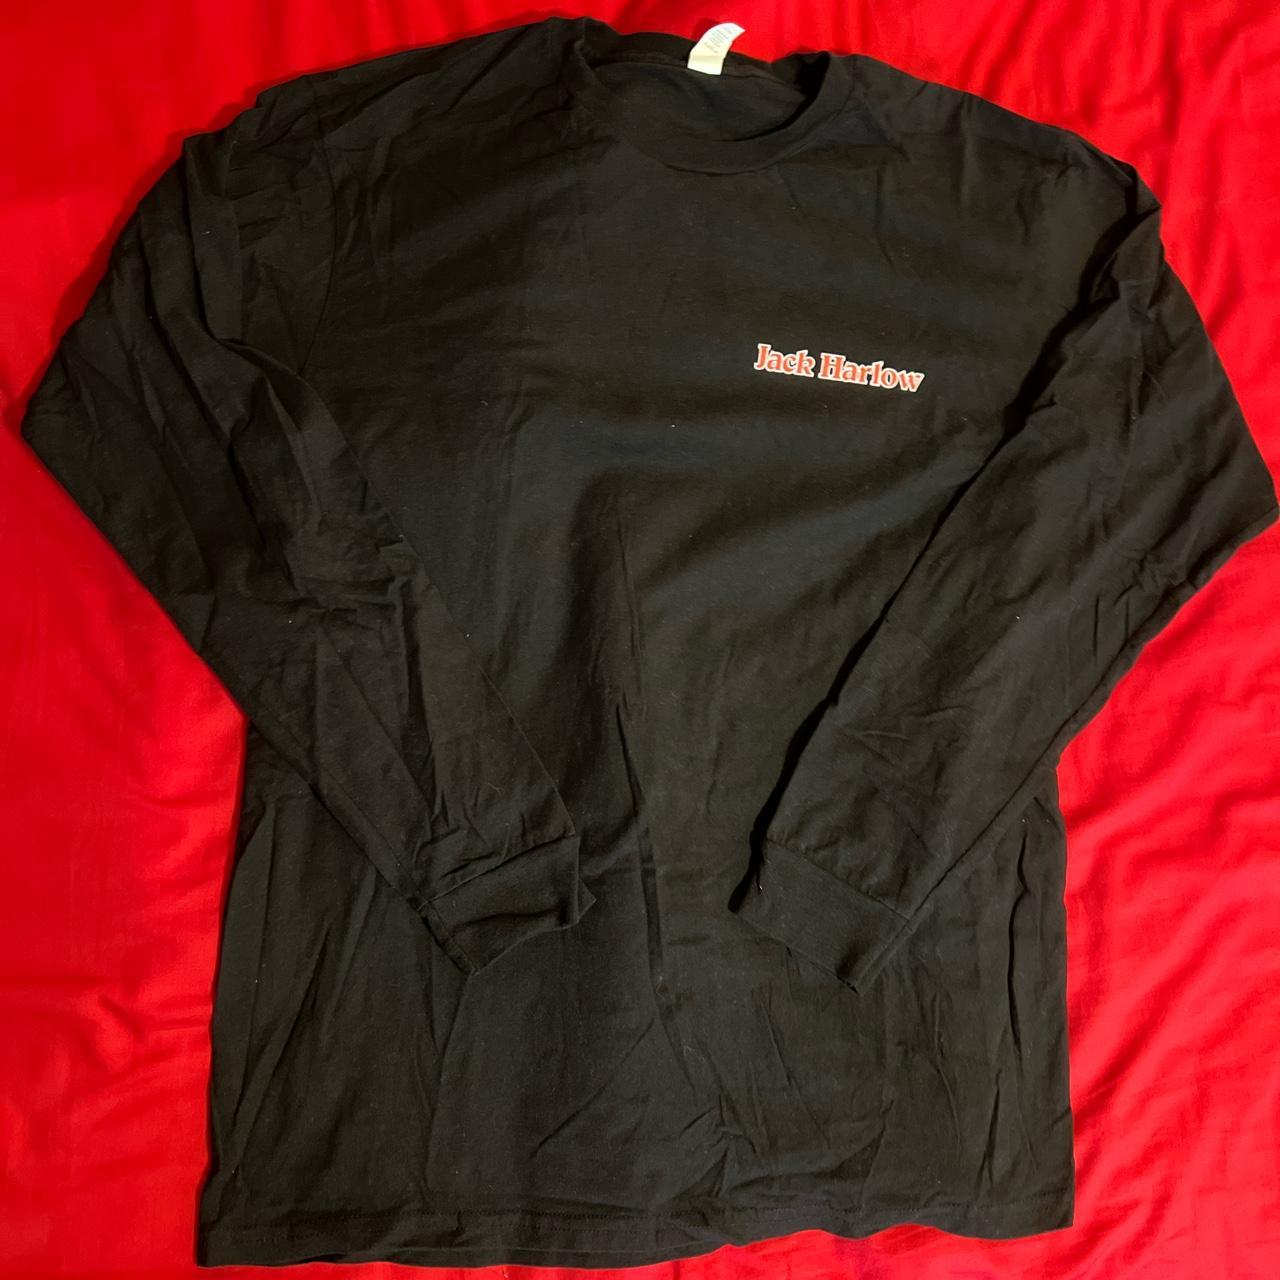 Supreme Shop Tee  Urban Outfitters